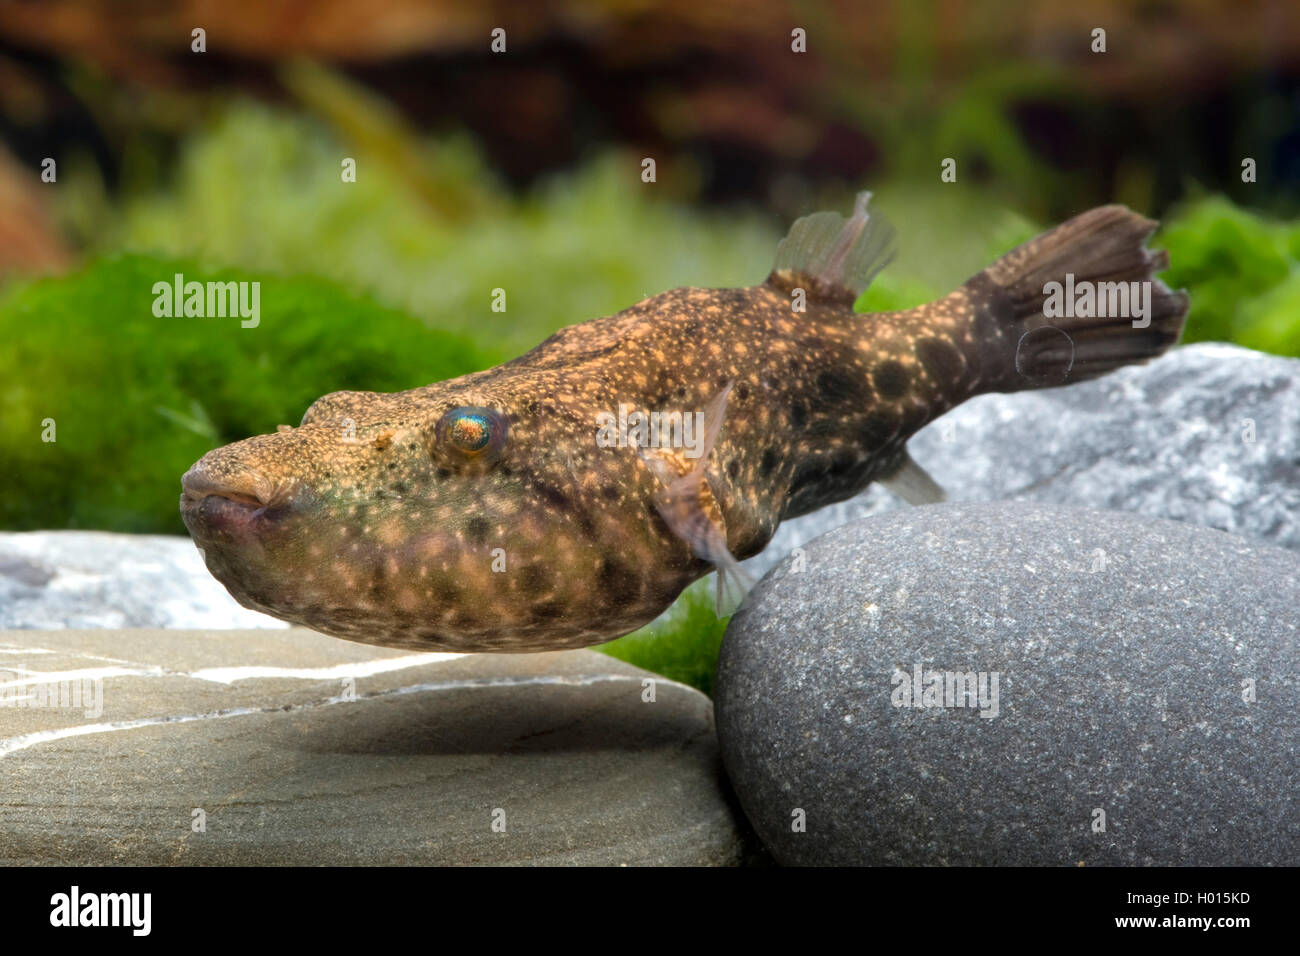 Arrowhead Puffer High Resolution Stock Photography and Images - Alamy